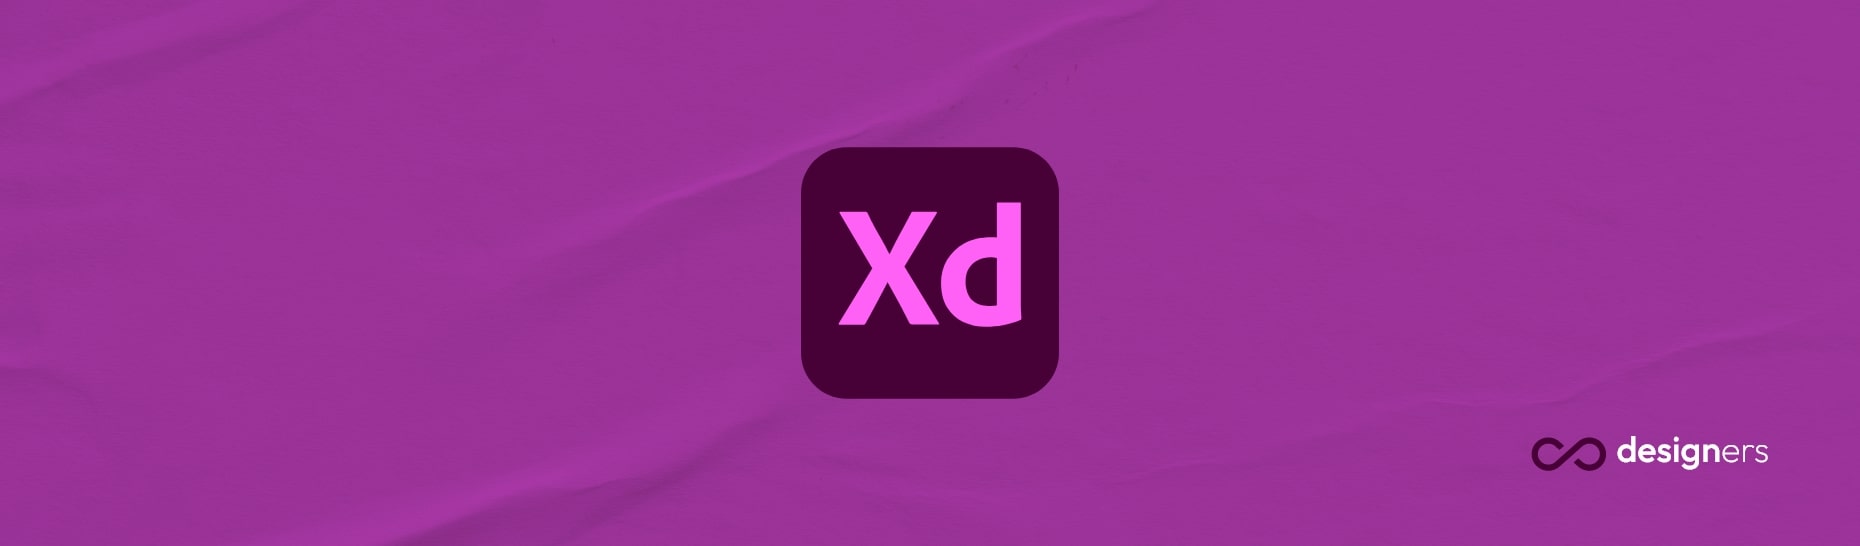 What should I learn first Figma or Adobe XD?